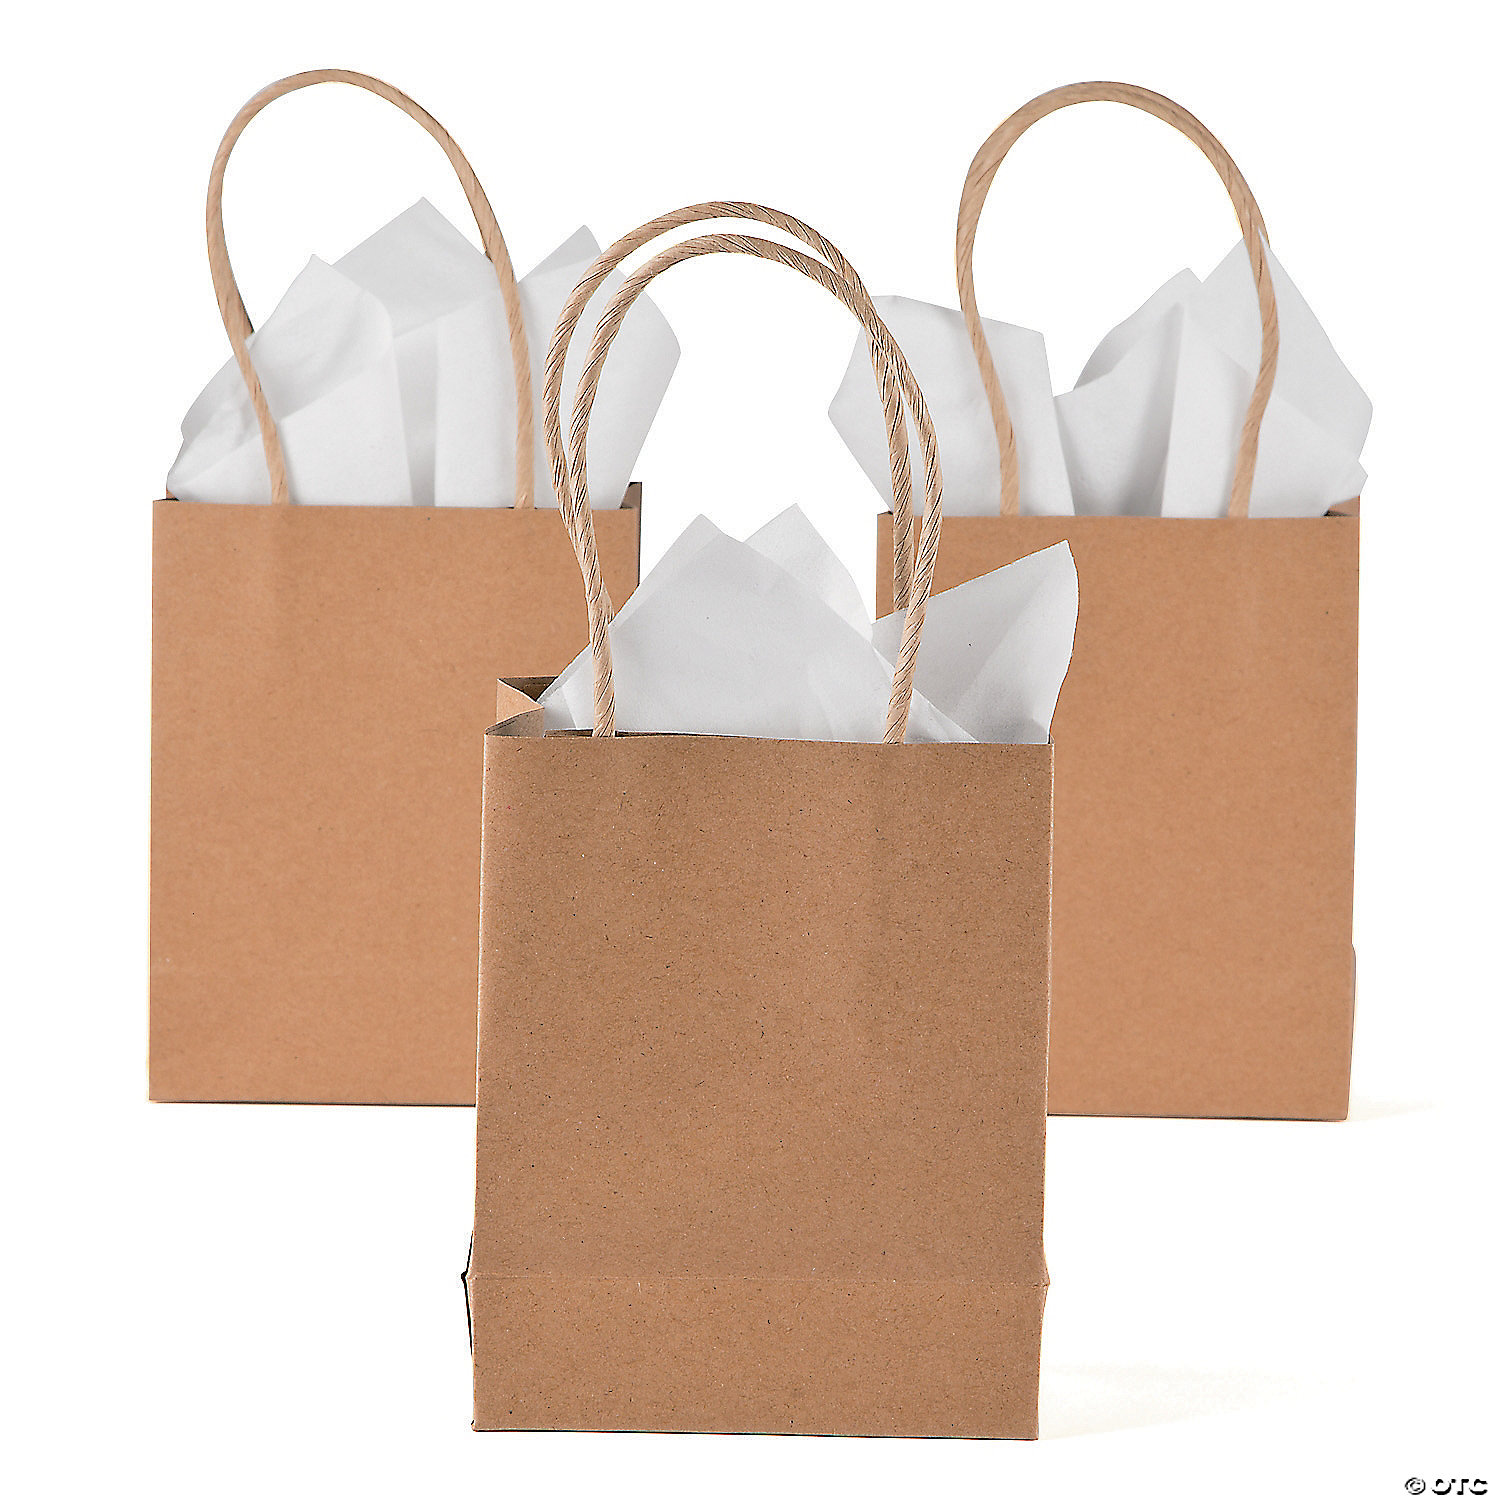 50 Pcs Retail Shopping Craft Gift Bags Brown Paper With Handles 10 x 5 x 13" NEW